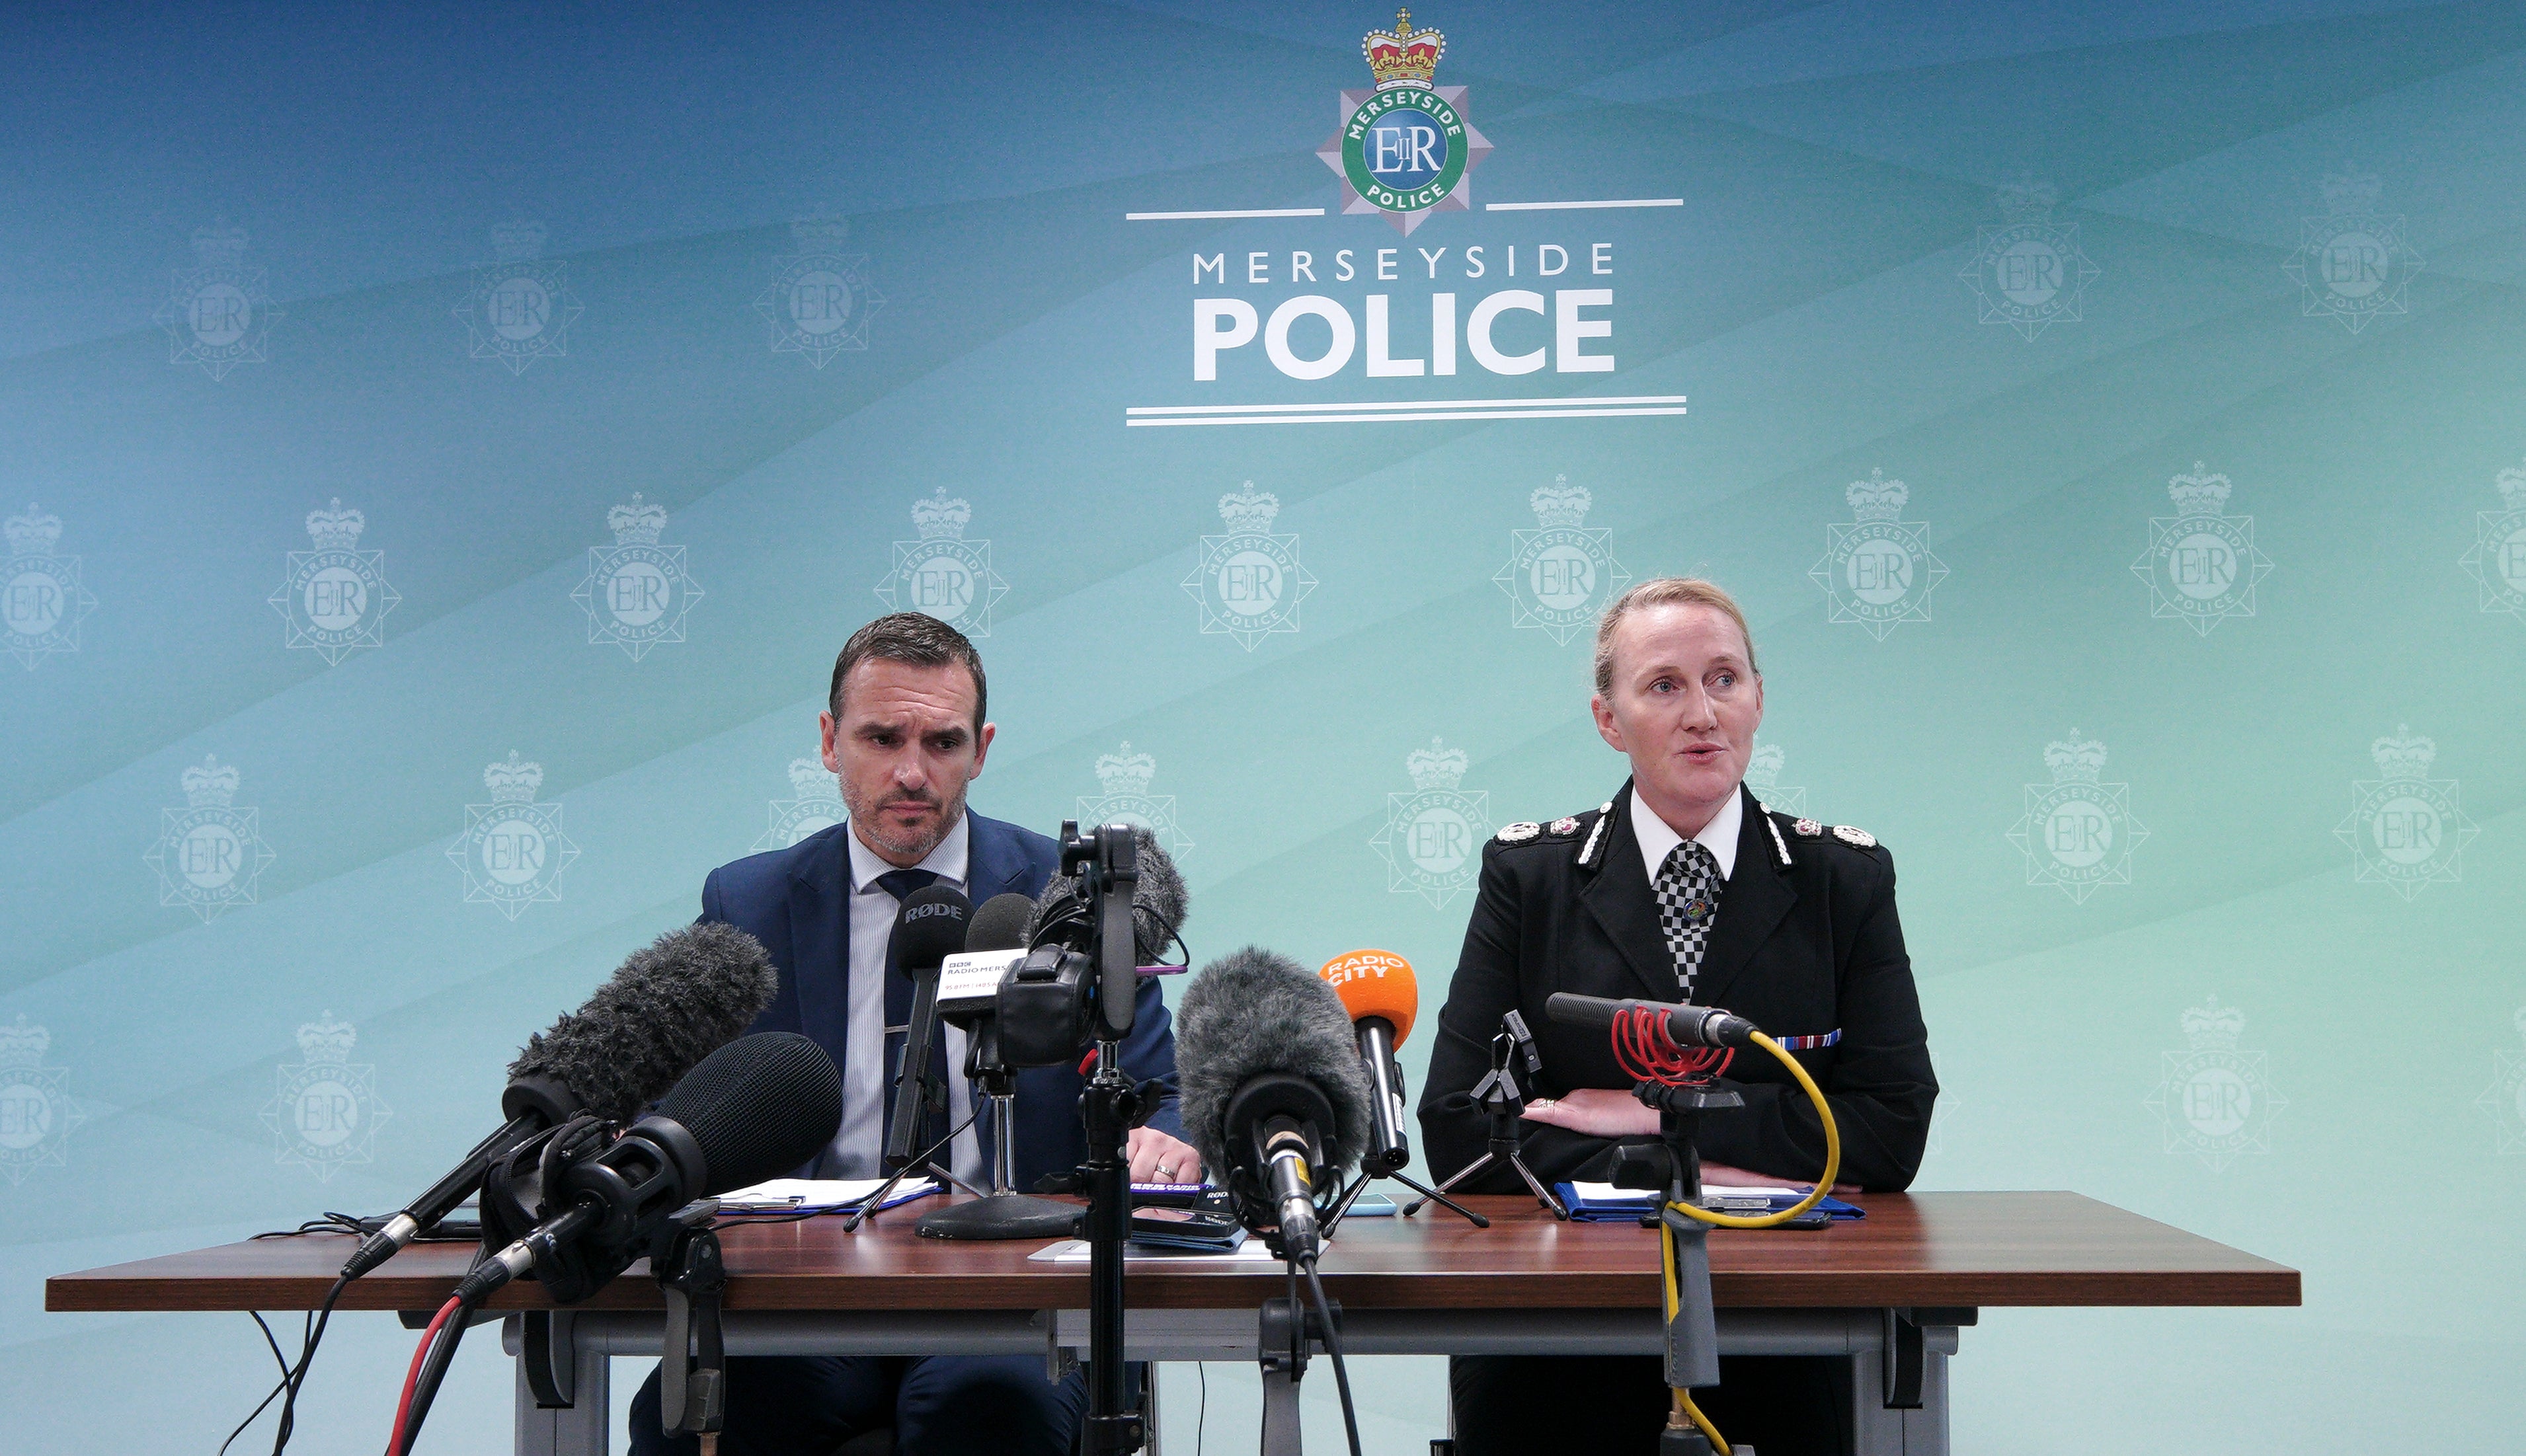 Police have urged anyone with information about the shooting to come forward